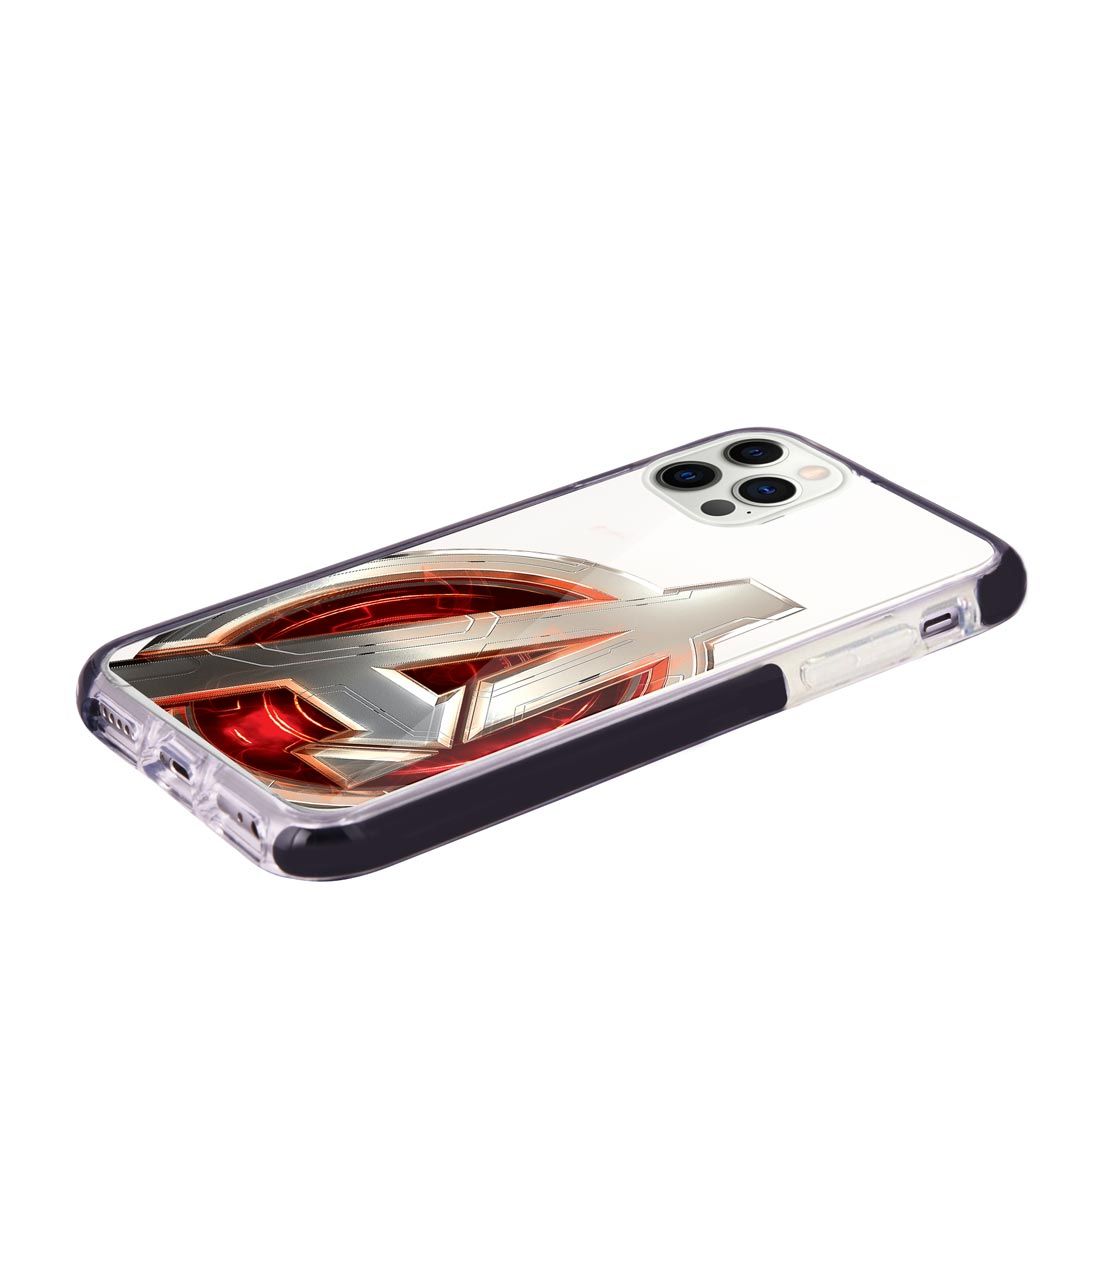 Avengers Version 2 - Extreme Case for iPhone 12 Pro Max